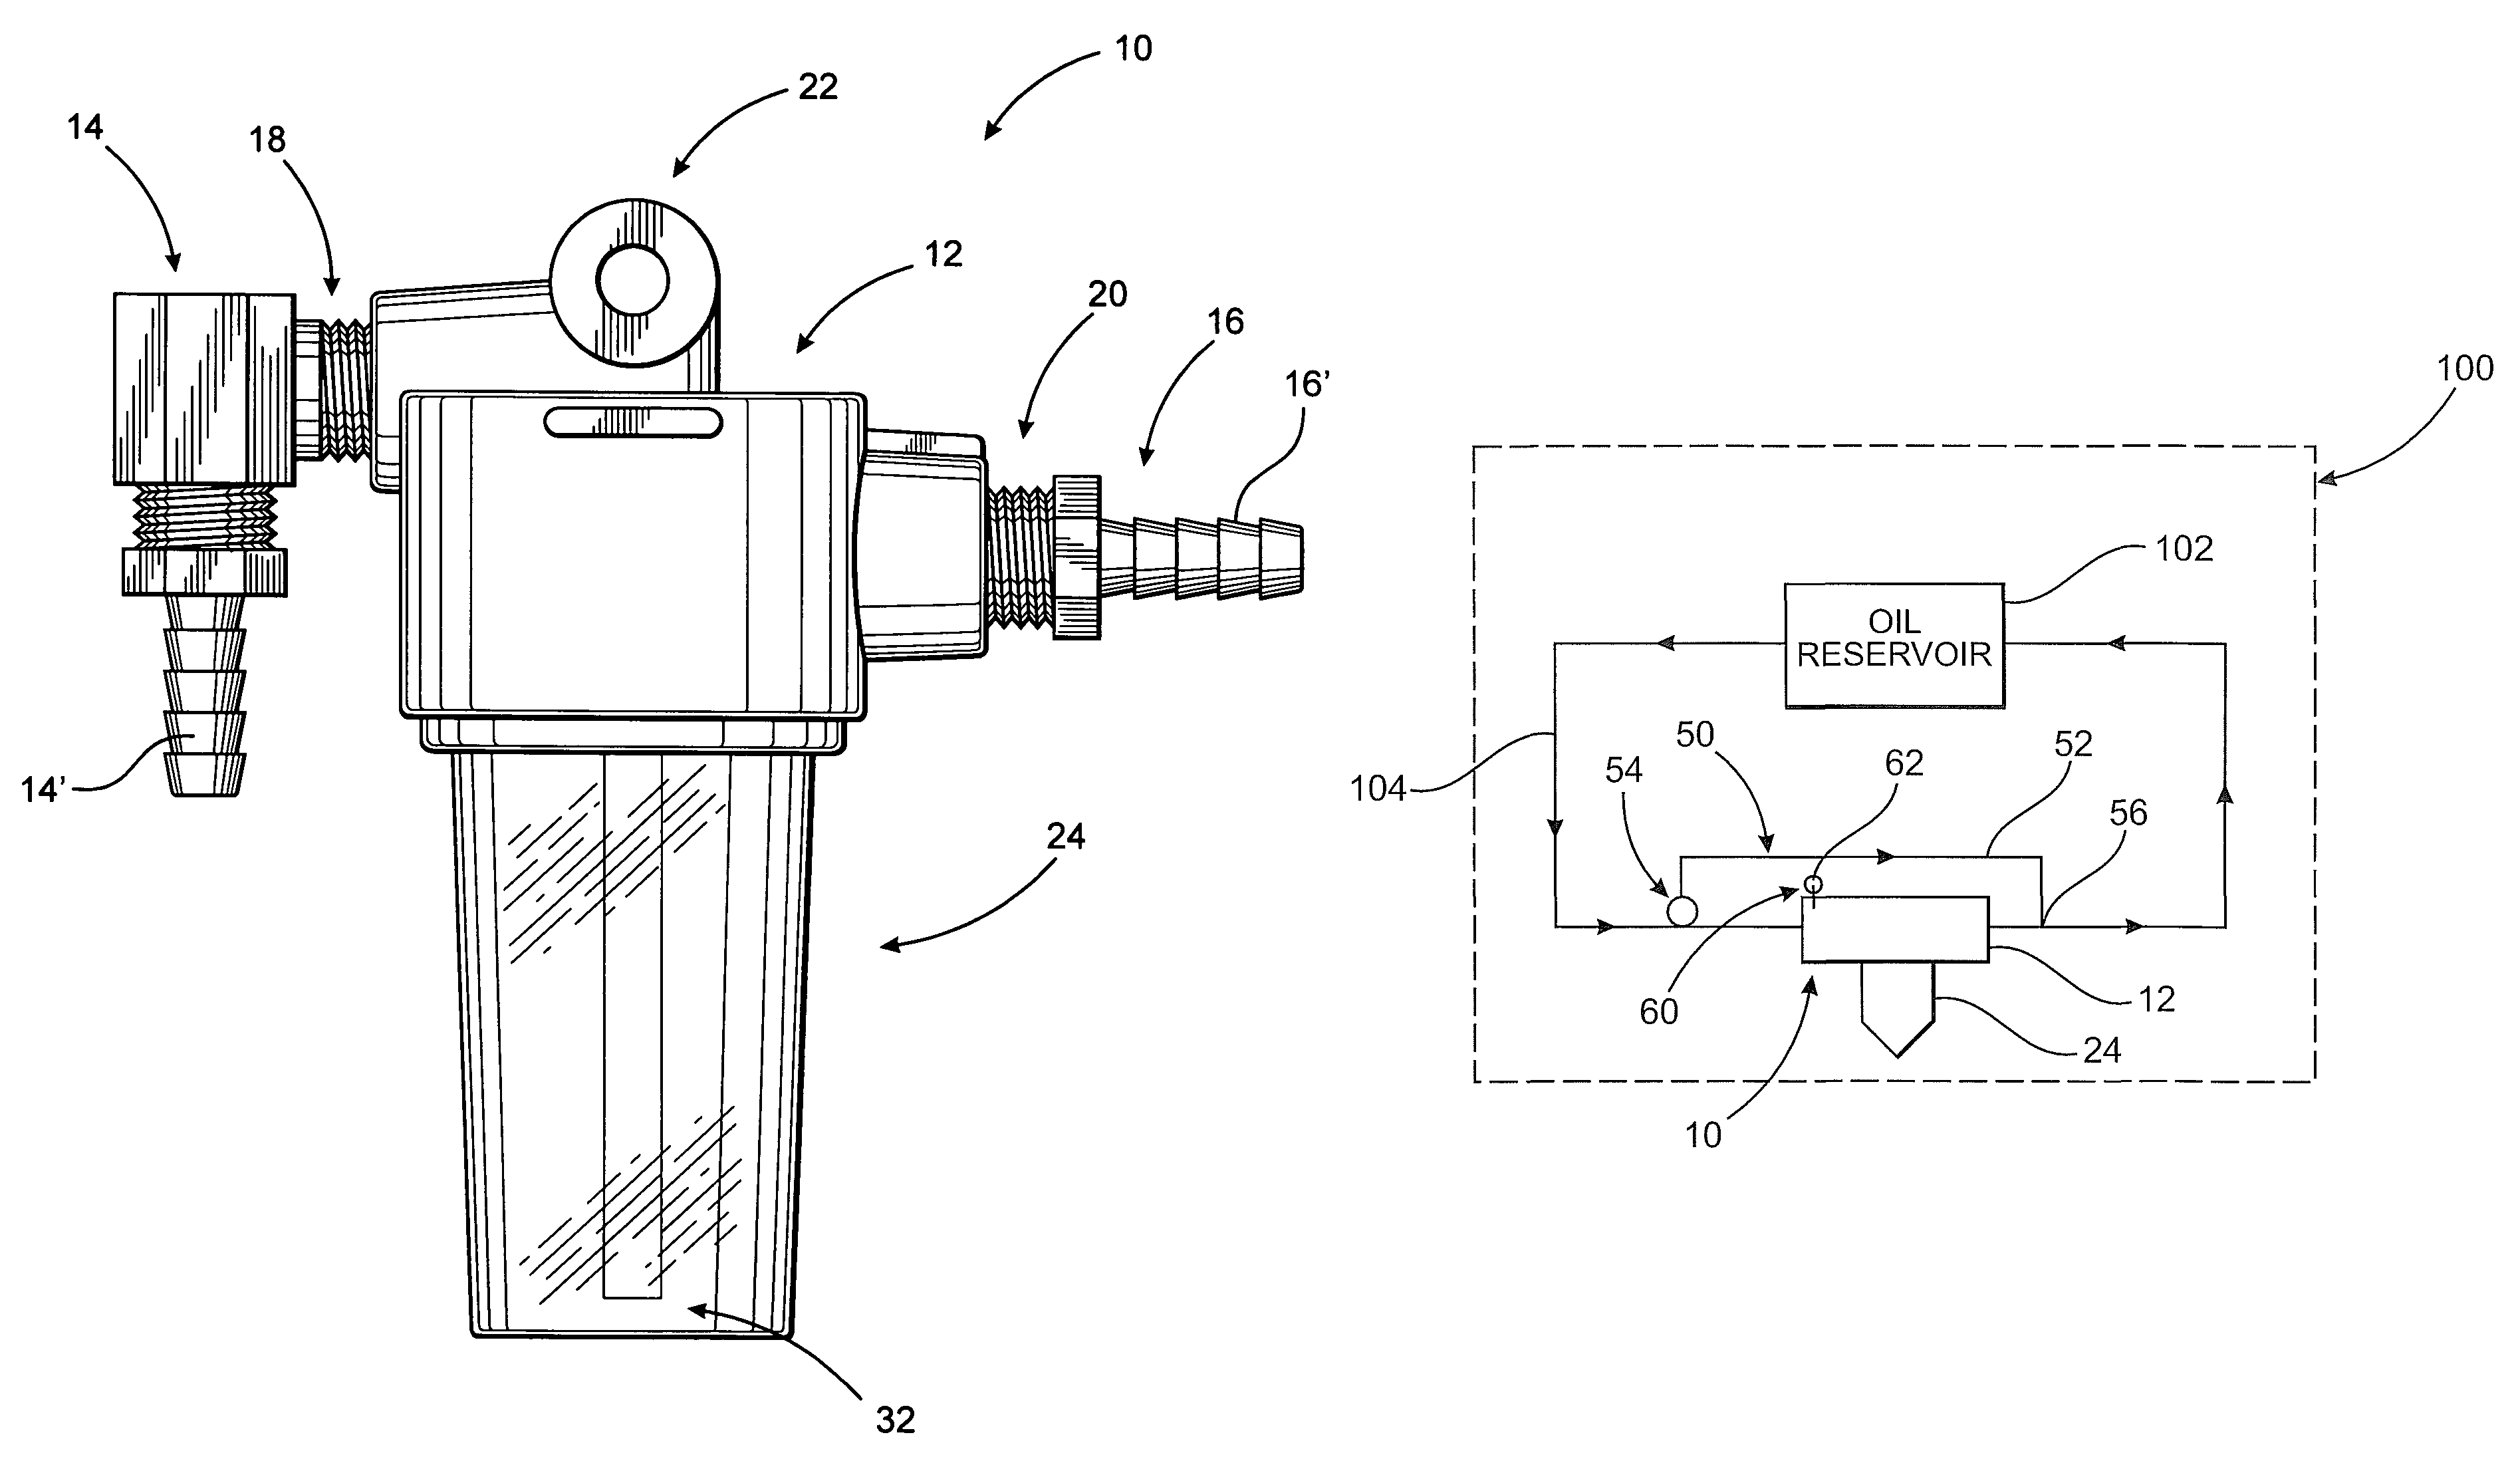 Simplified oil sampling assembly